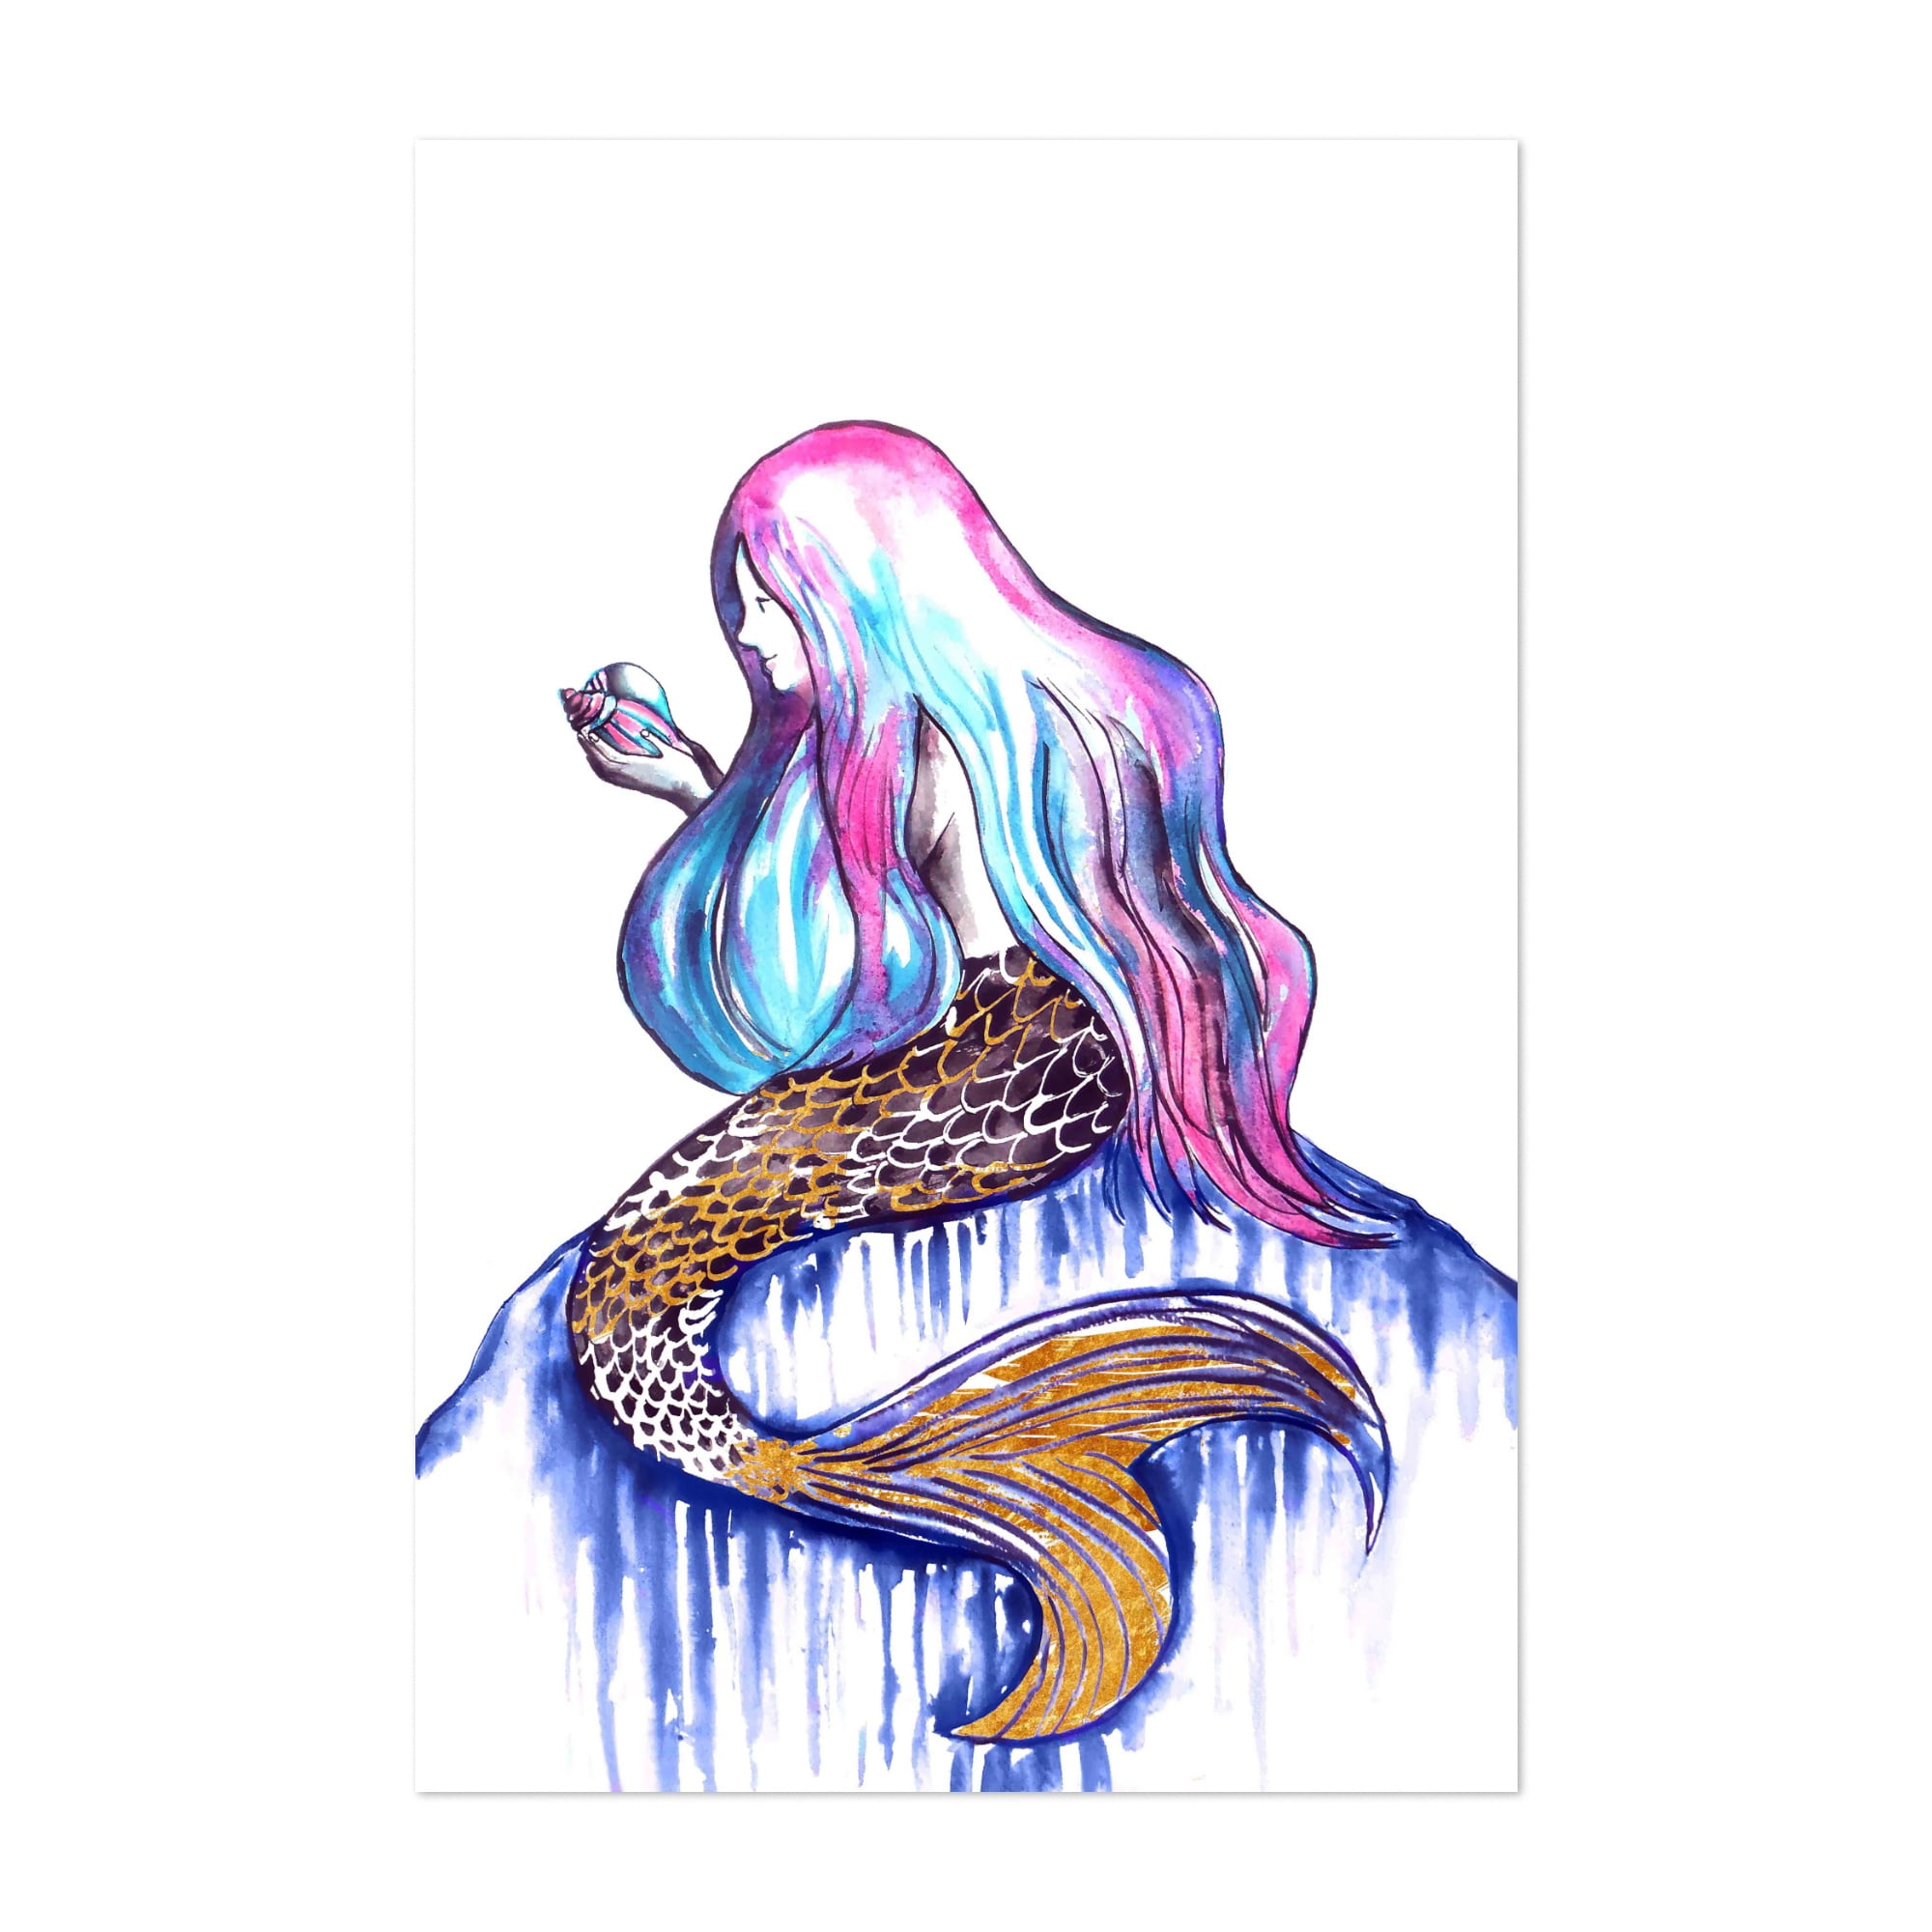 12"x16"Mermaid Poster HD Canvas print Painting Home Decor Picture room Wall art 